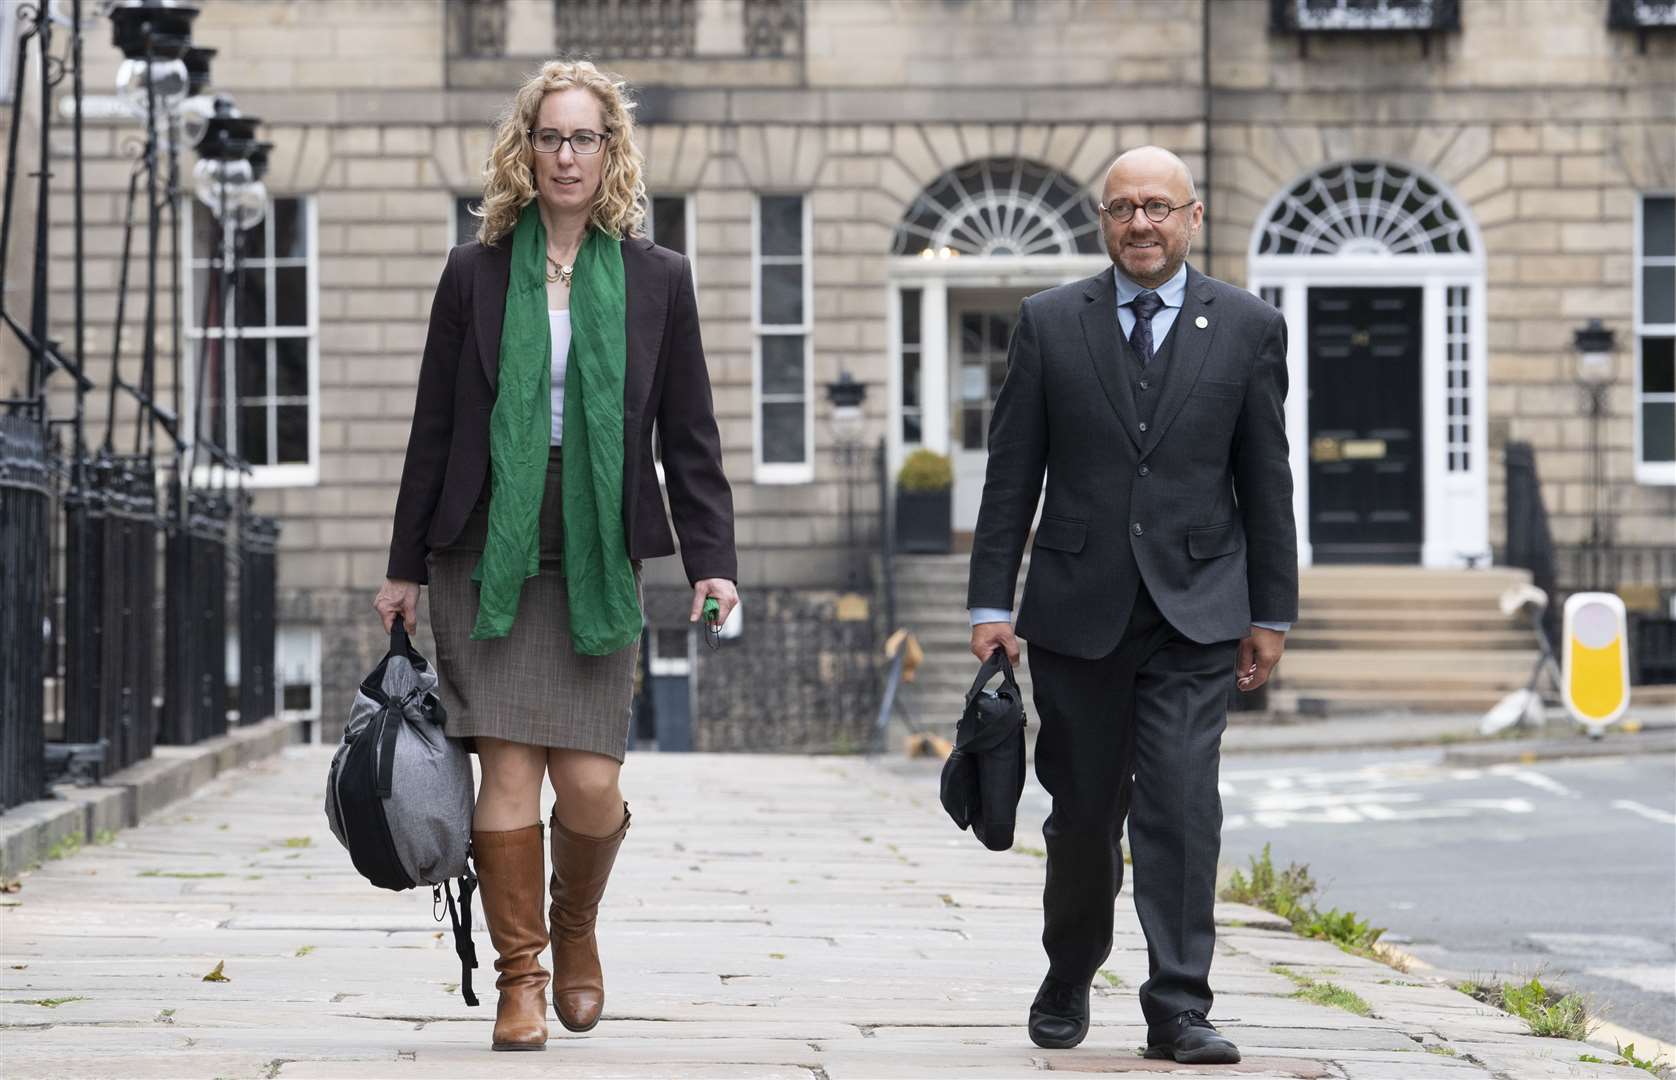 The Bute House Agreement gave Scottish Green co-leaders Lorna Slater and Patrick Harvie ministerial posts in the Scottish Government – but there are now growing tensions between the two parties (Lesley Martin/PA)